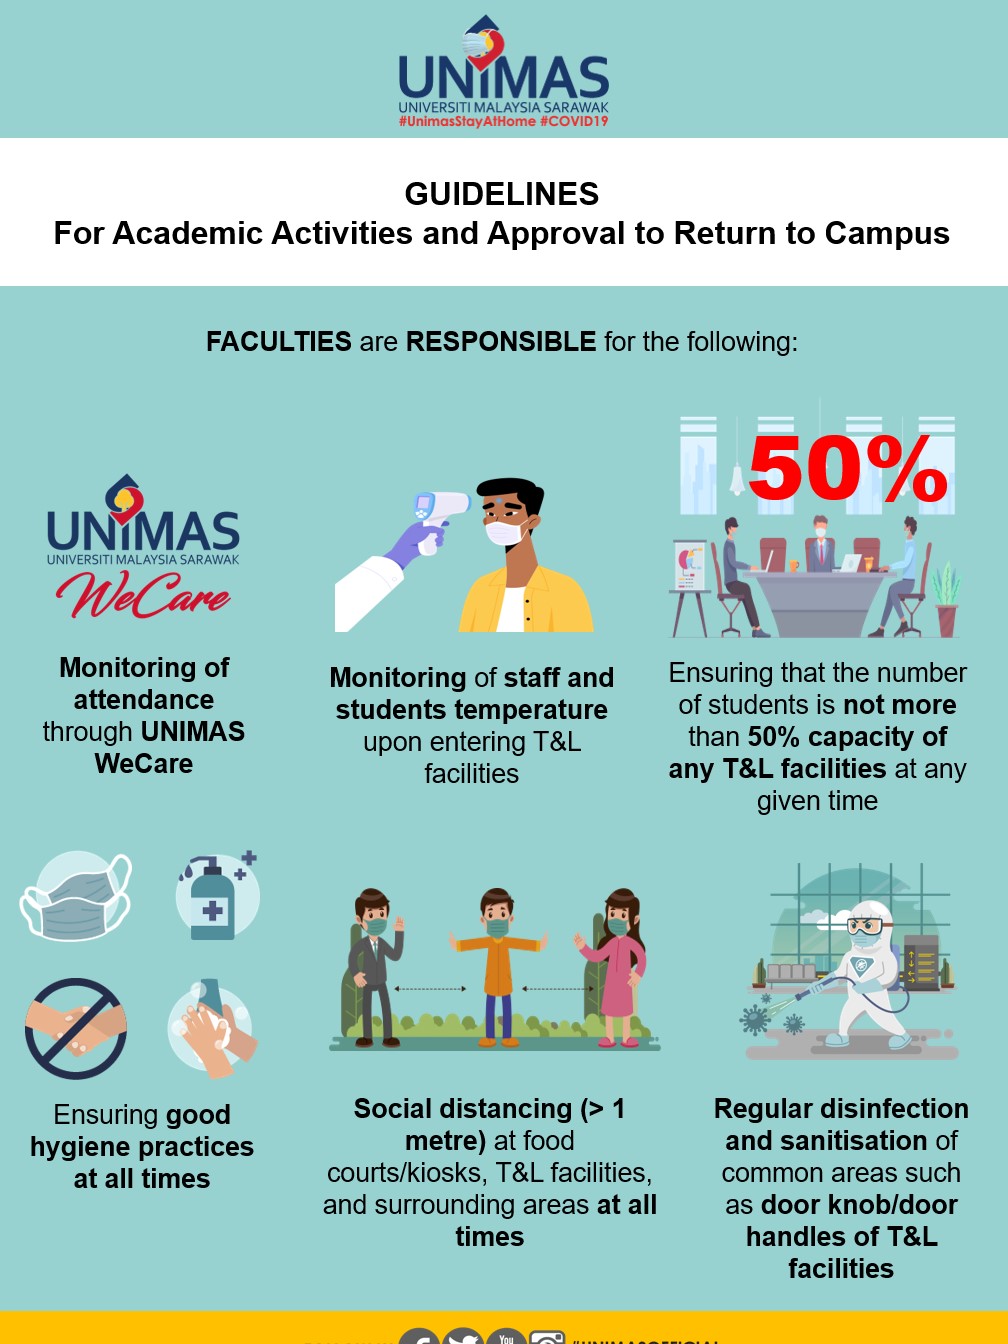 Guidelines For Faculties.jpg